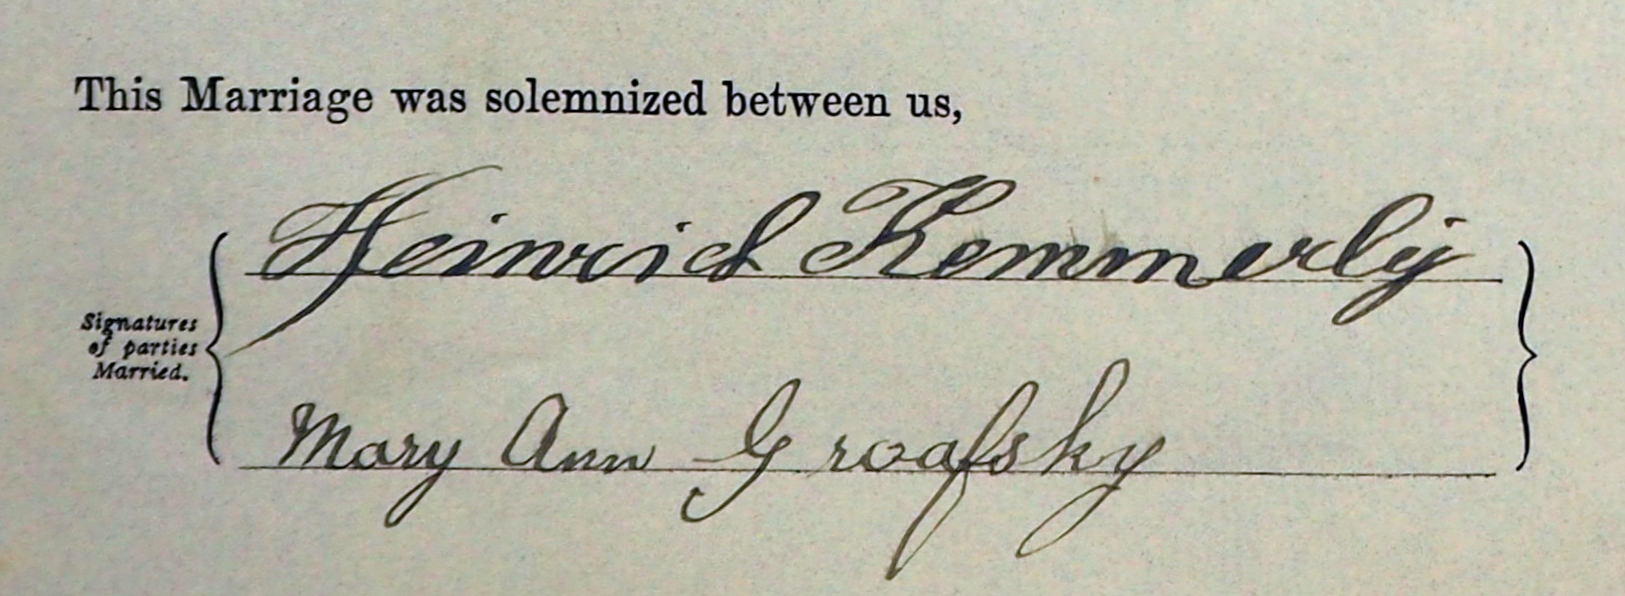 The 
signatures of the bride and groom